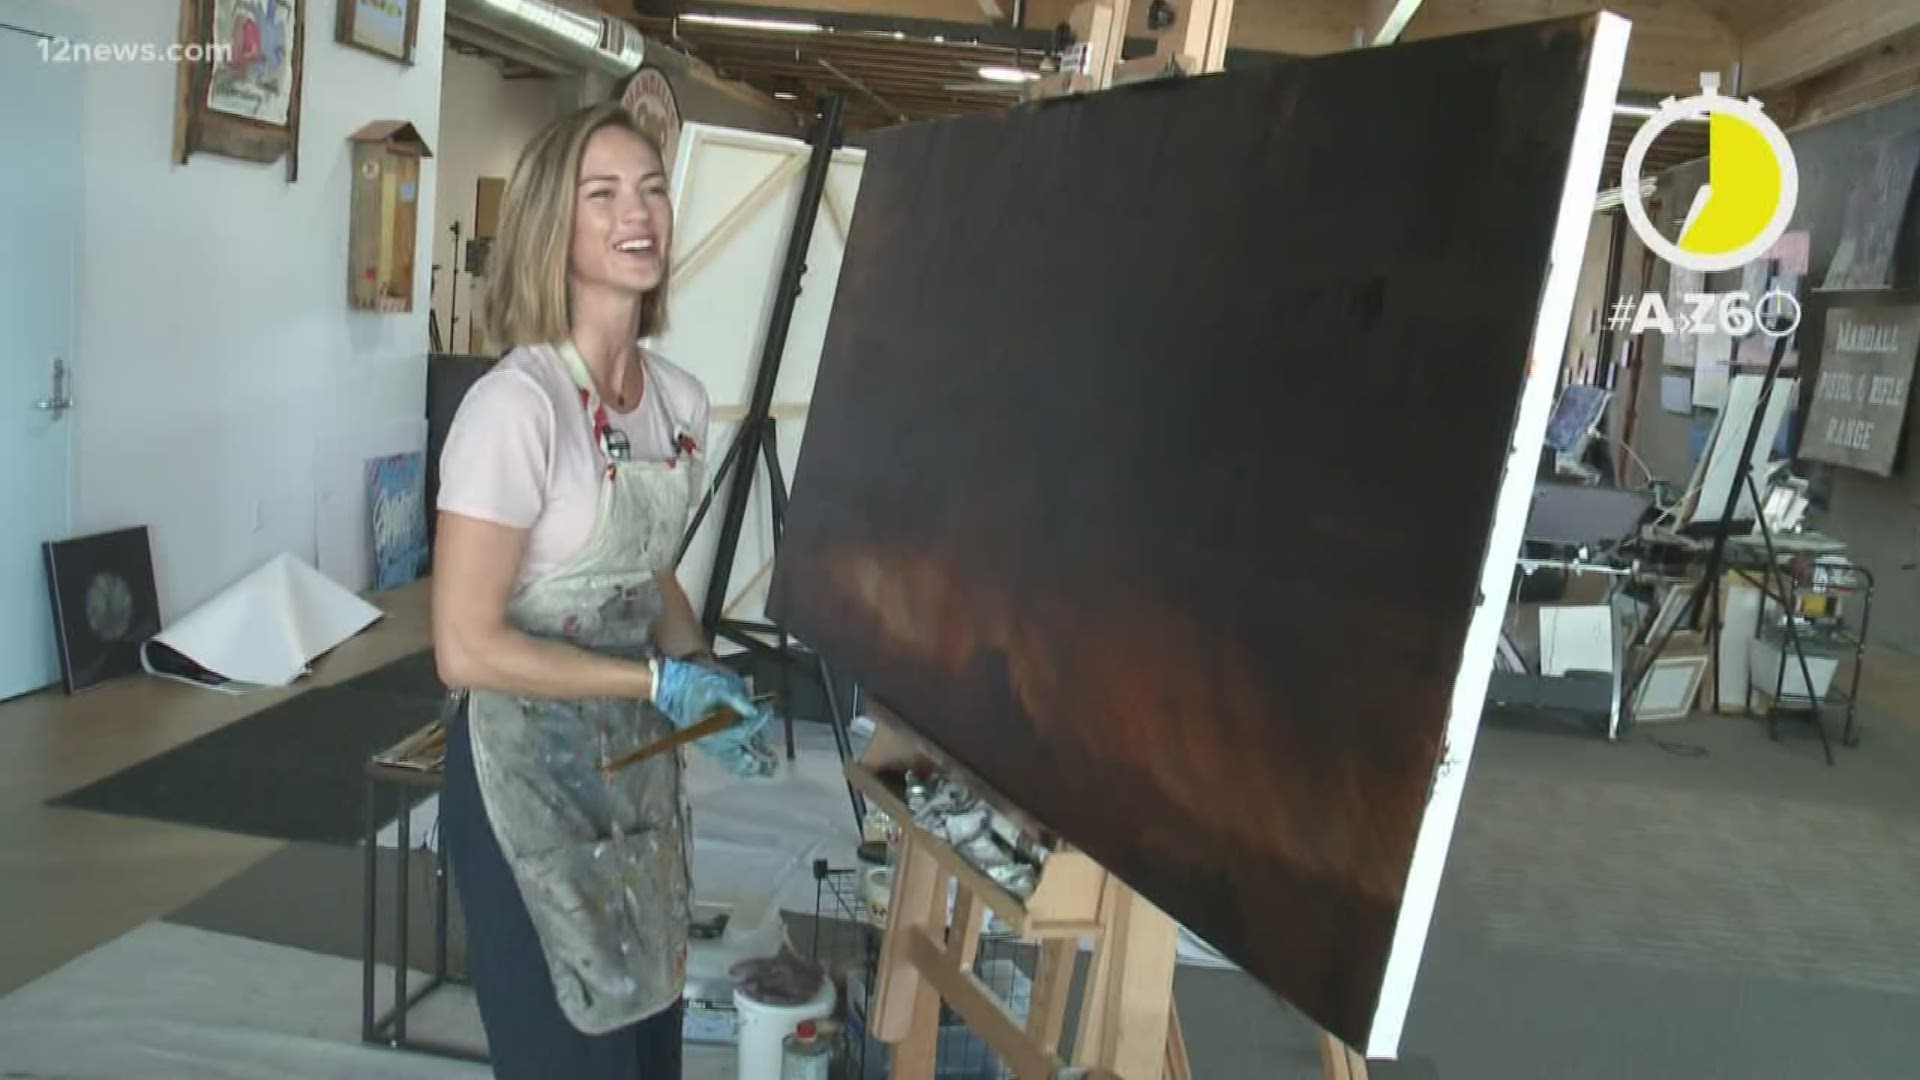 An office space in Scottsdale offers a unique spot for artists to work on their craft. Colleen Sikora has the story.